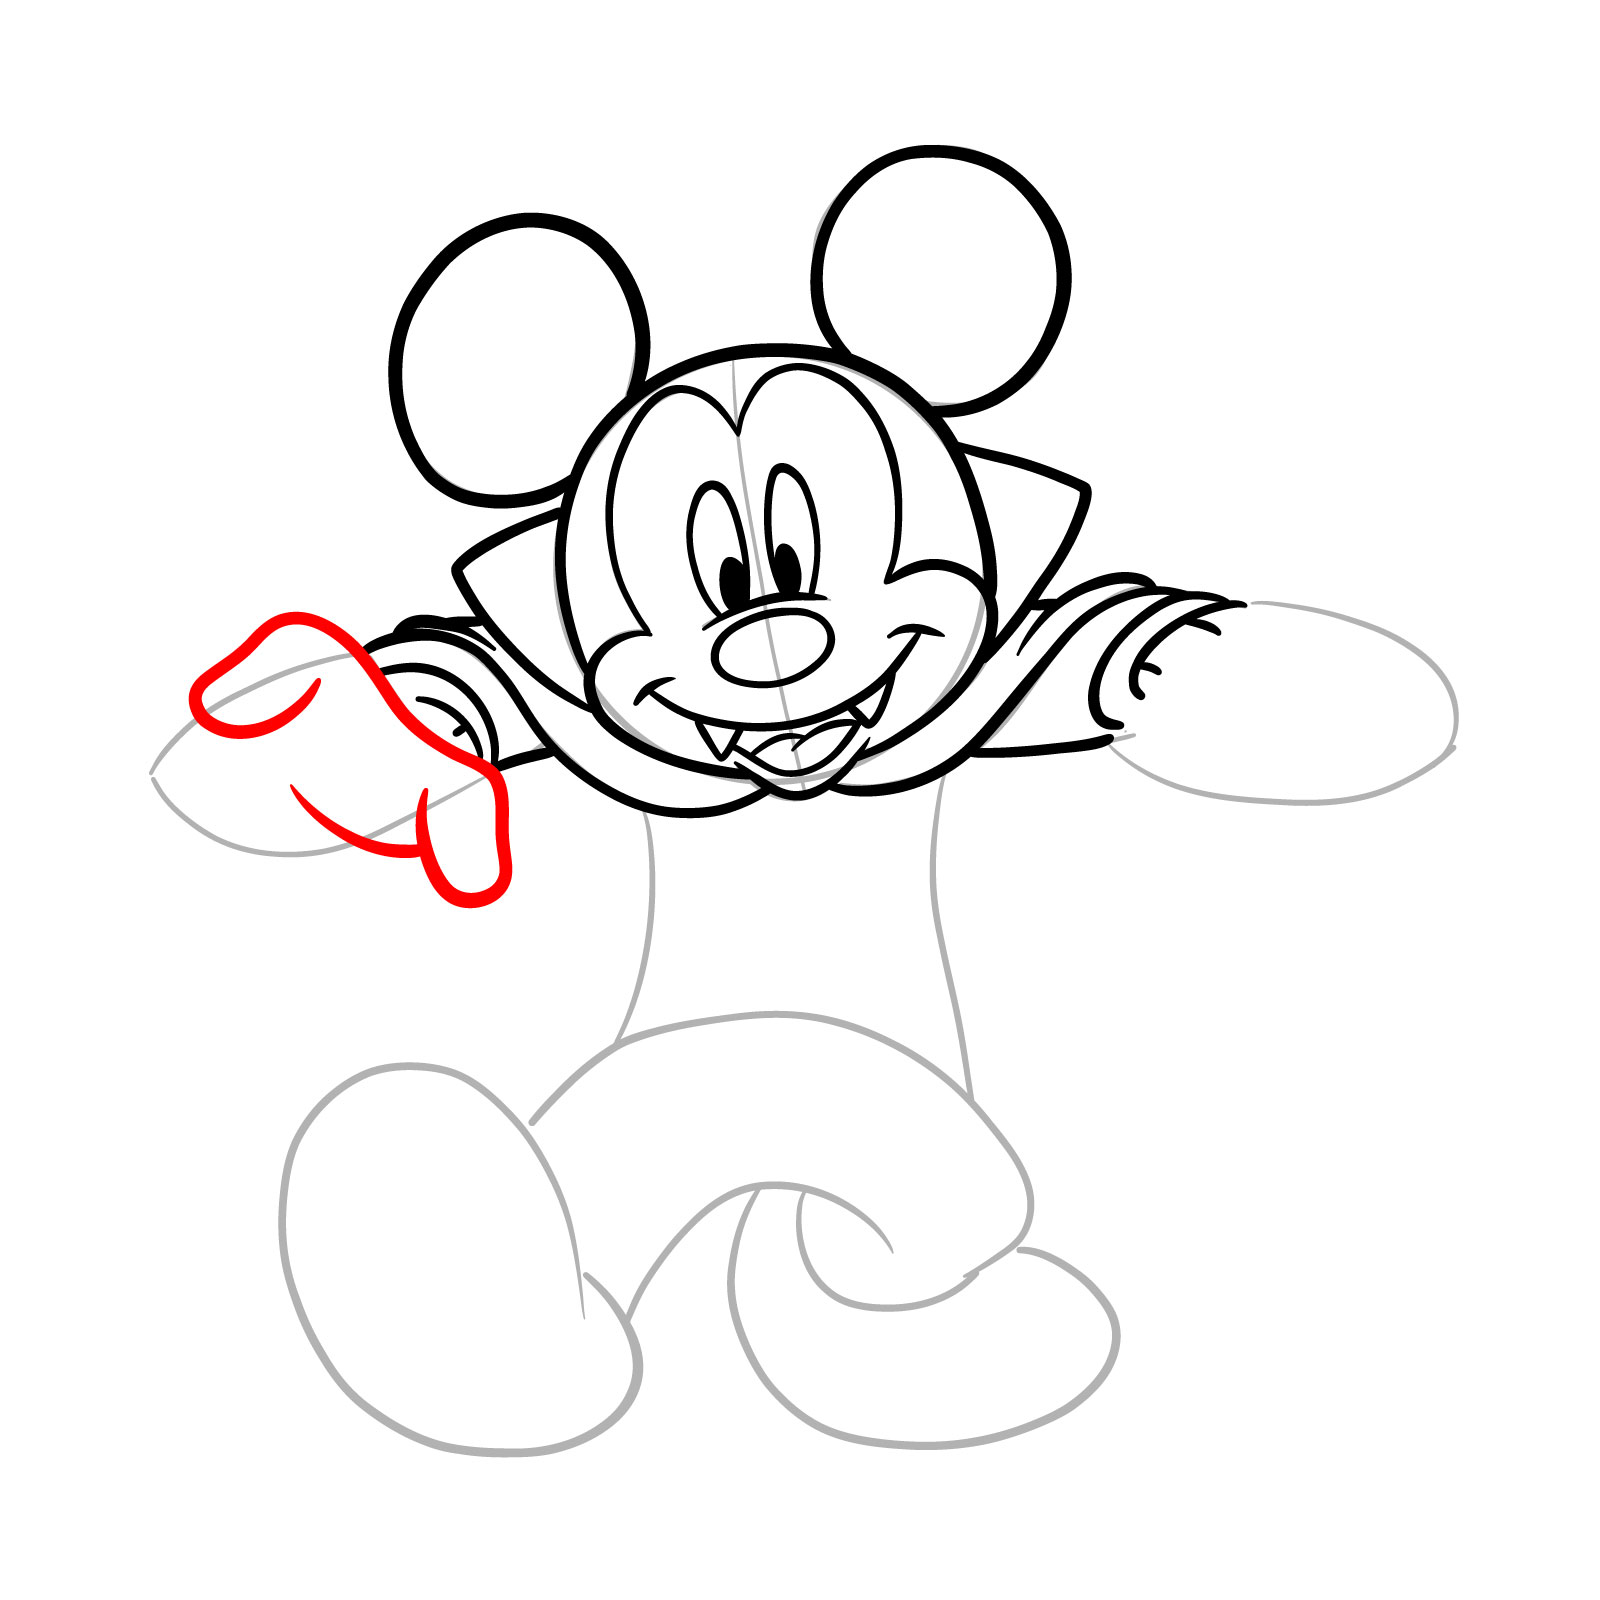 How to draw Dracula Mickey Mouse - step 15